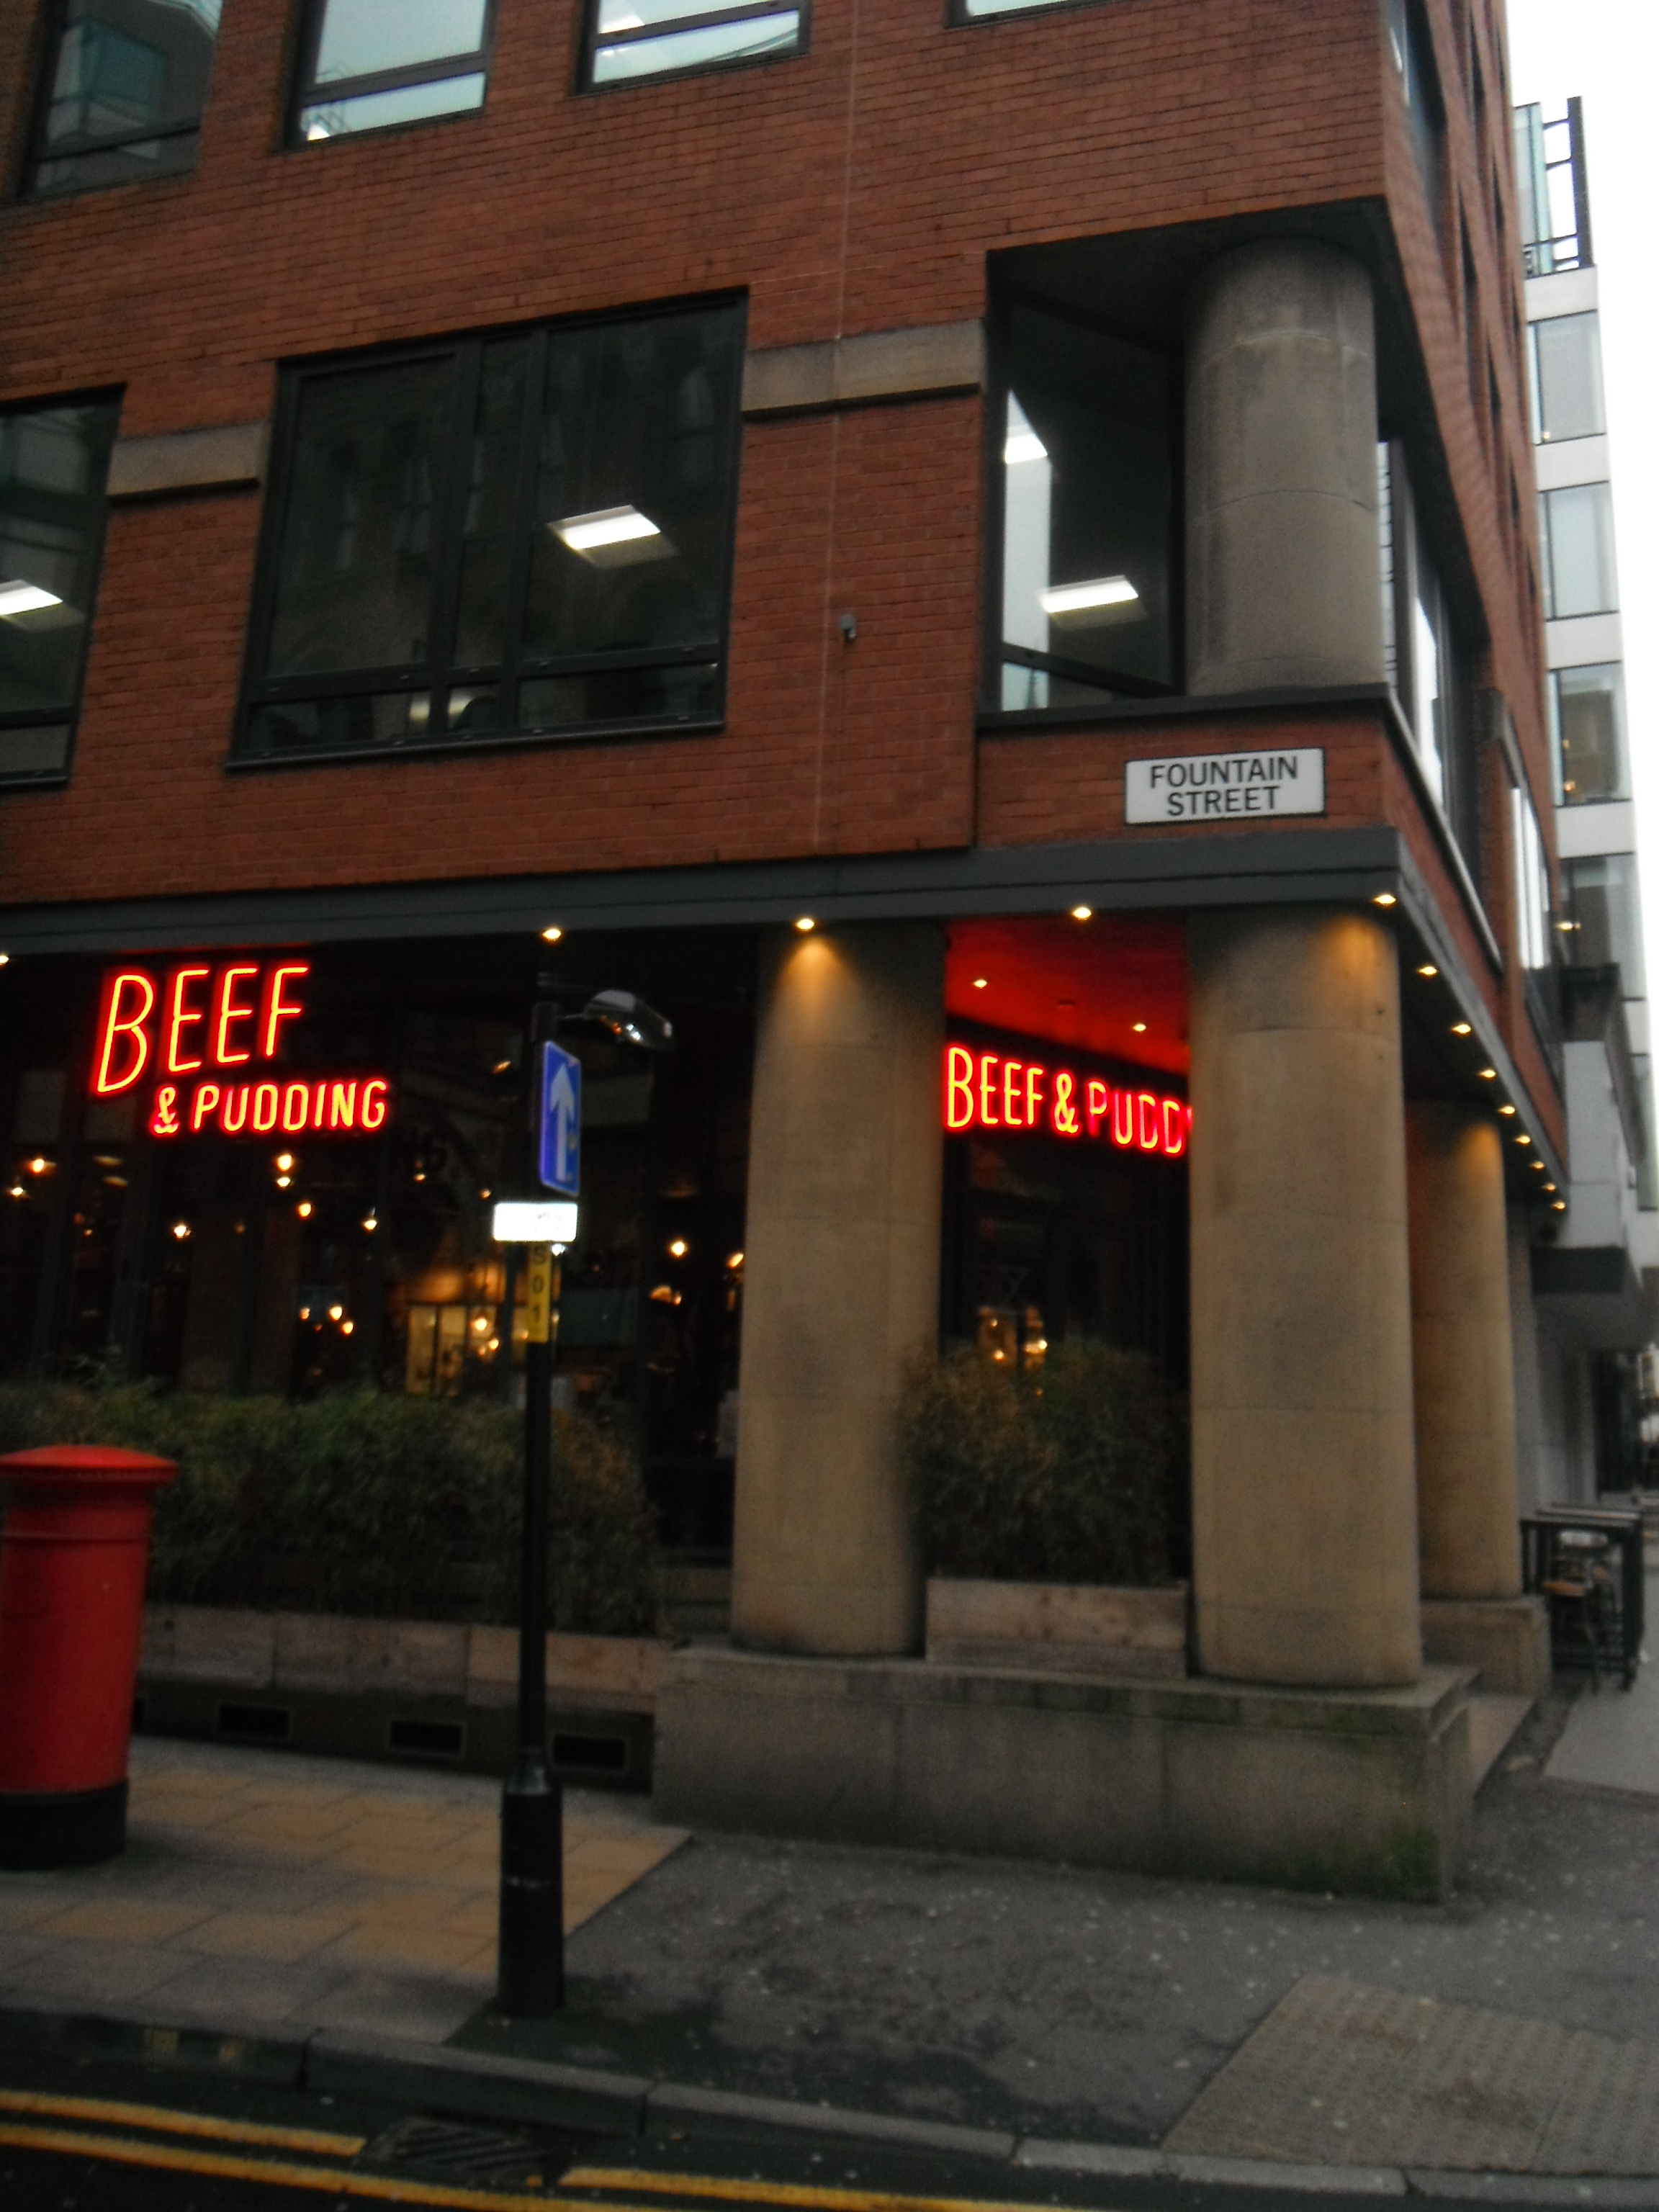 Photo taken by me – The Beef & Pudding bar, Manchester